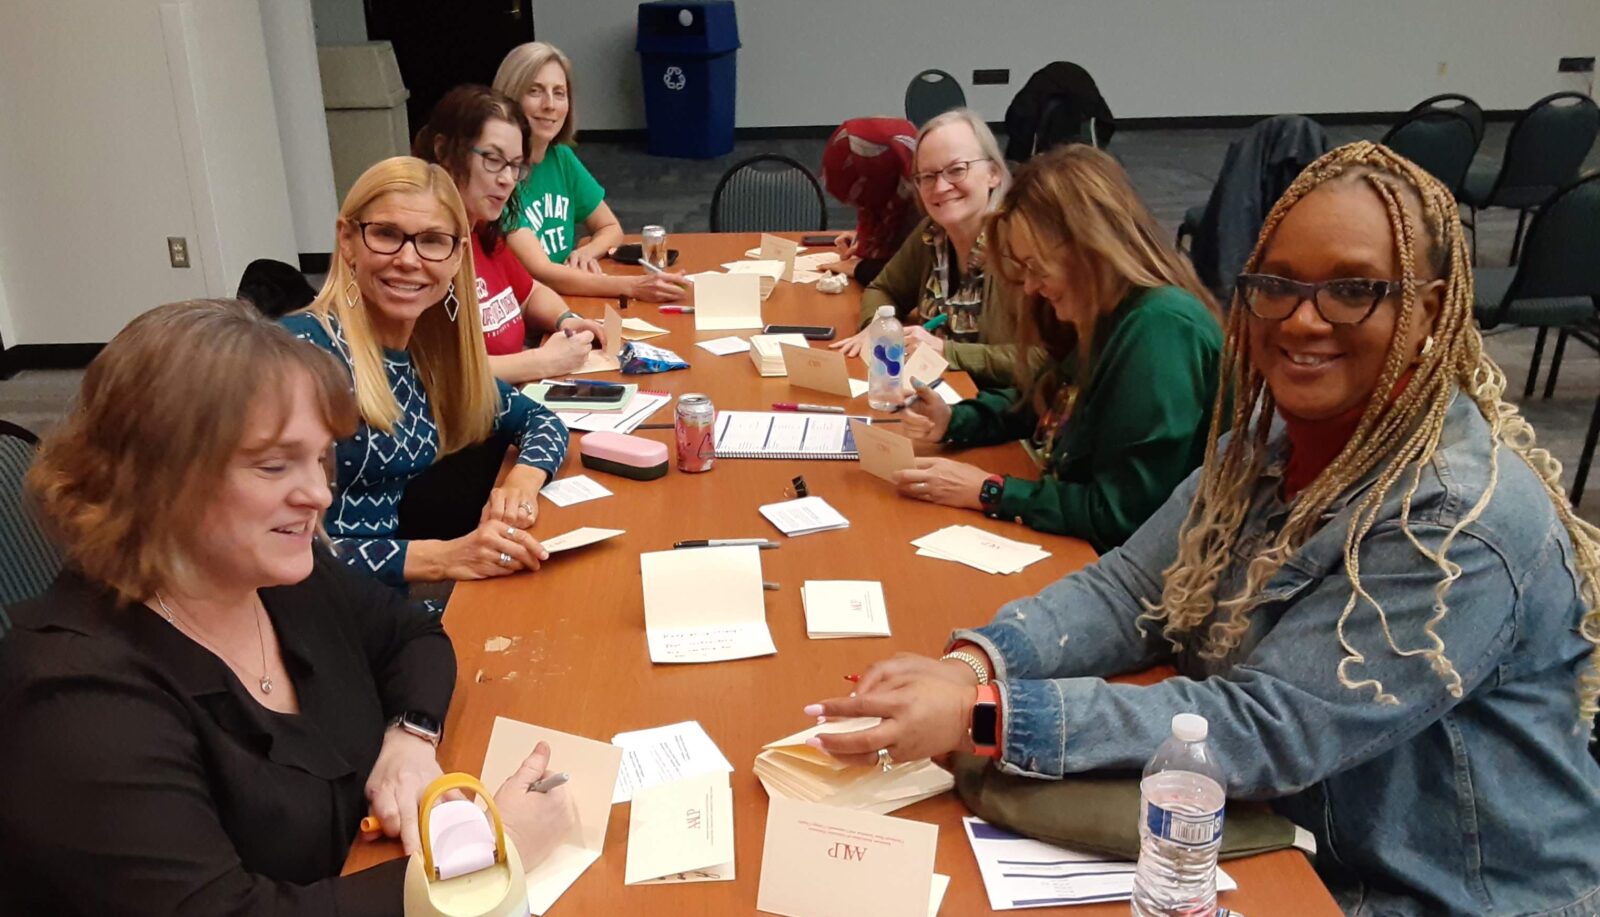 Faculty members writing notes of encouragement for the stress relief kits